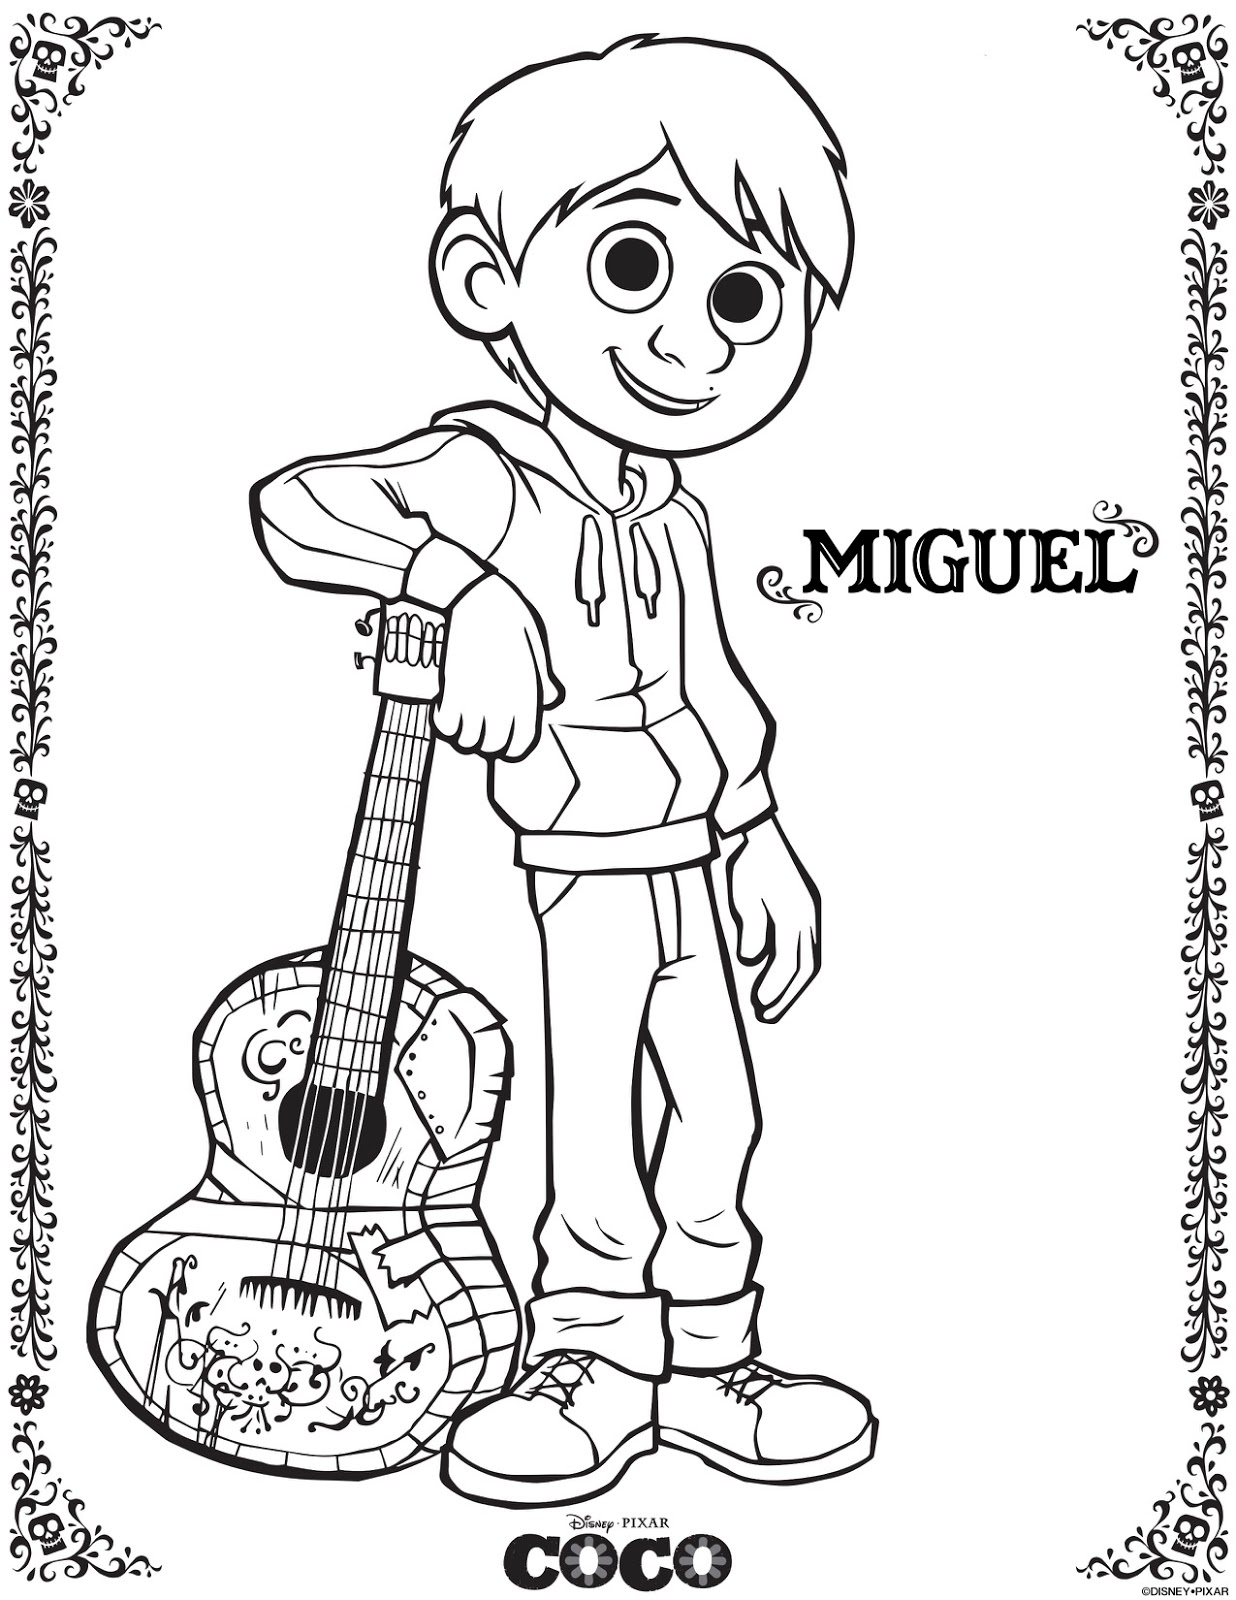 Download Woven by Words: Disney•Pixar's COCO - Coloring Pages